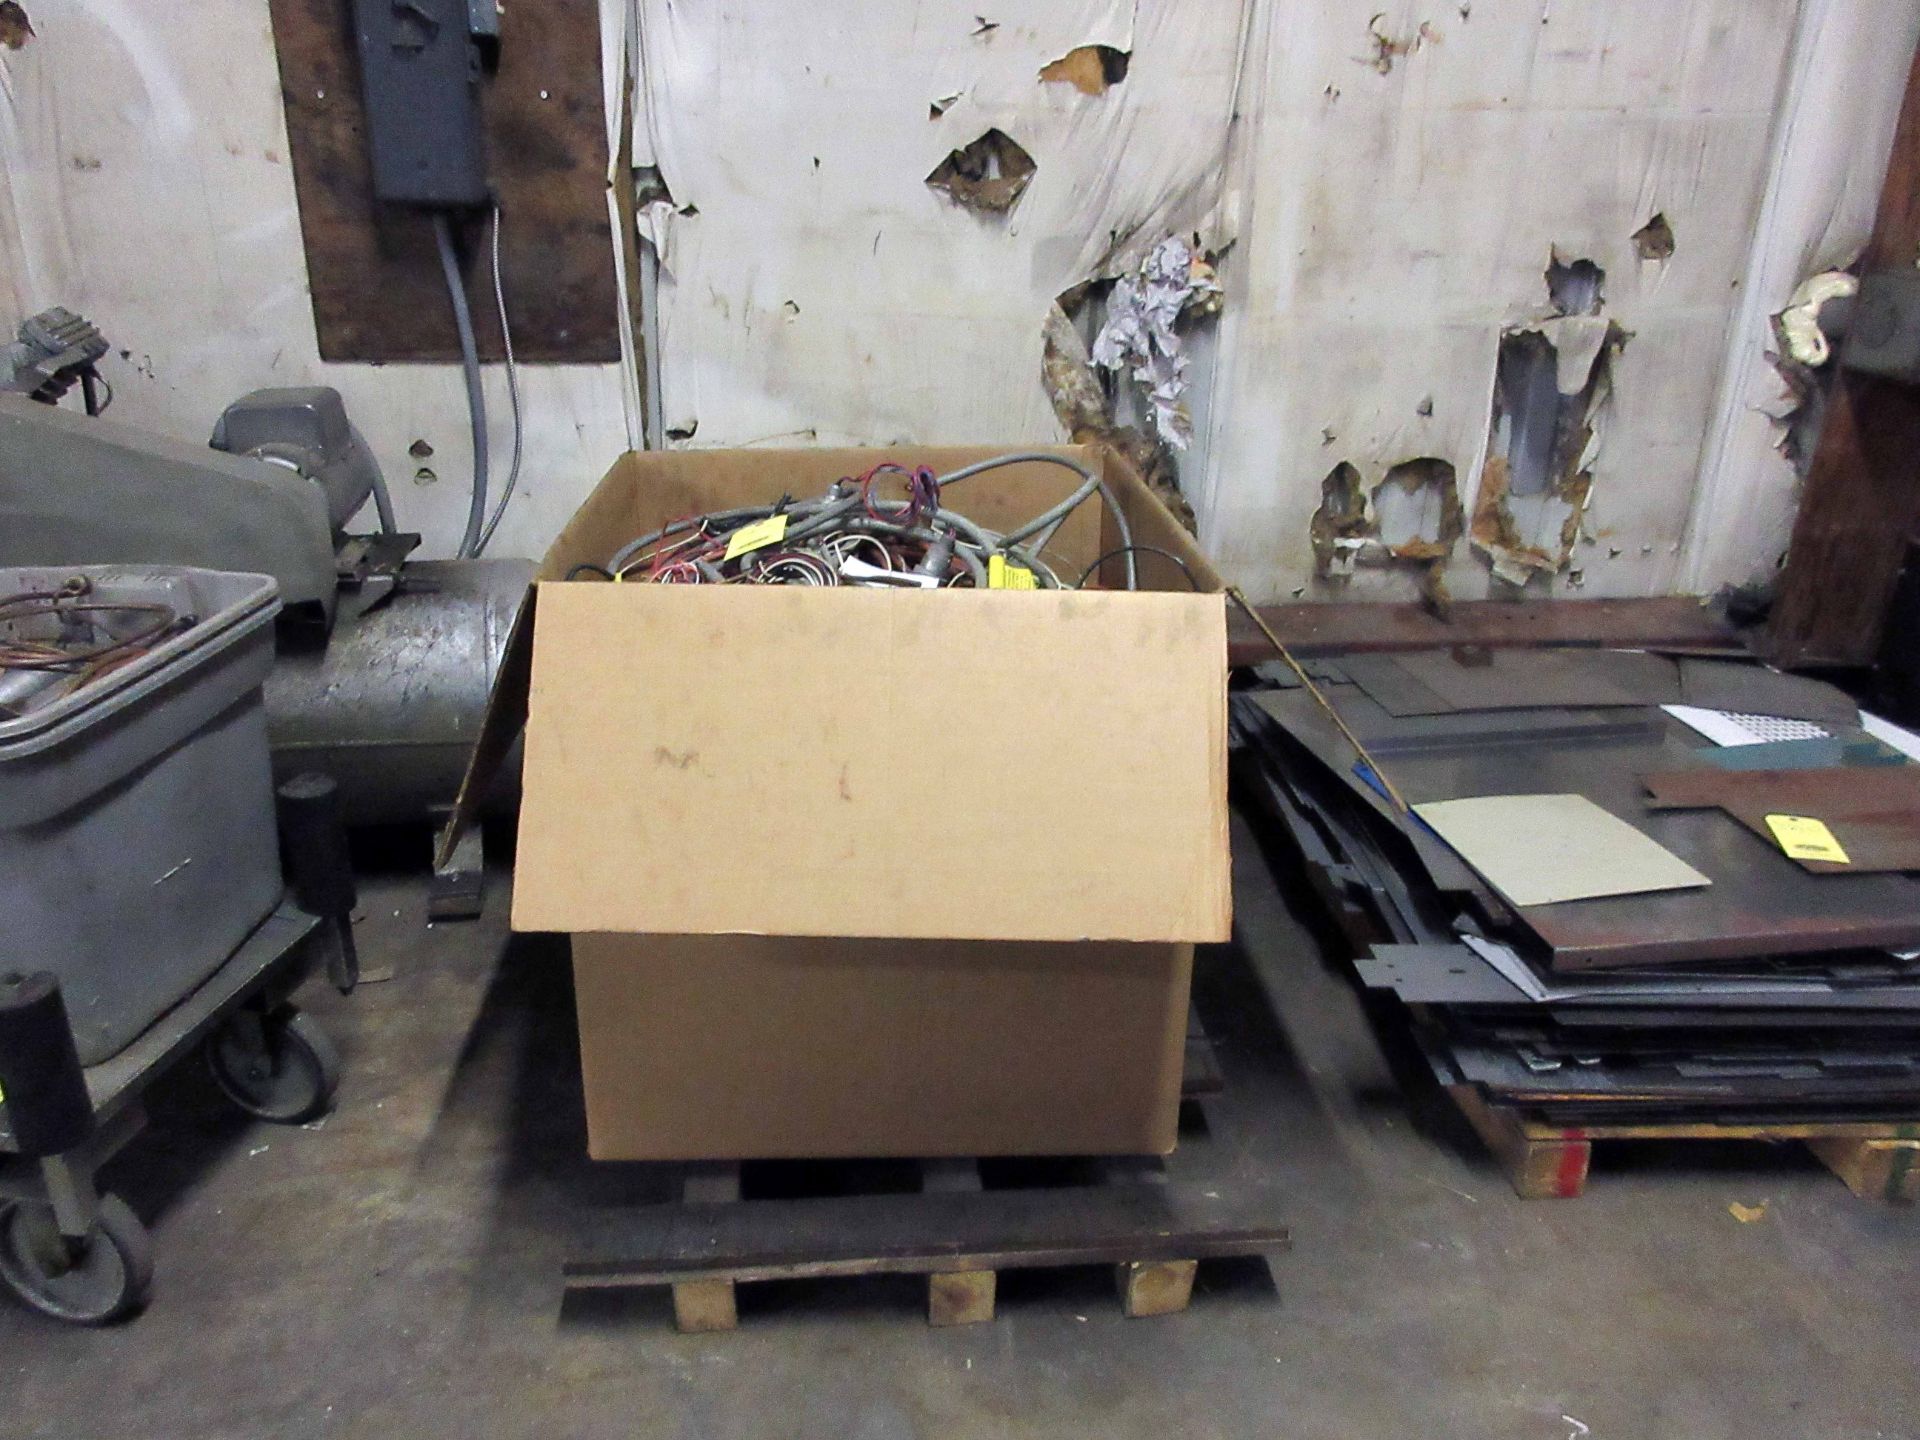 LOT CONSISTING OF: electrical cable & cords, in 41" x 41" box - Image 2 of 2